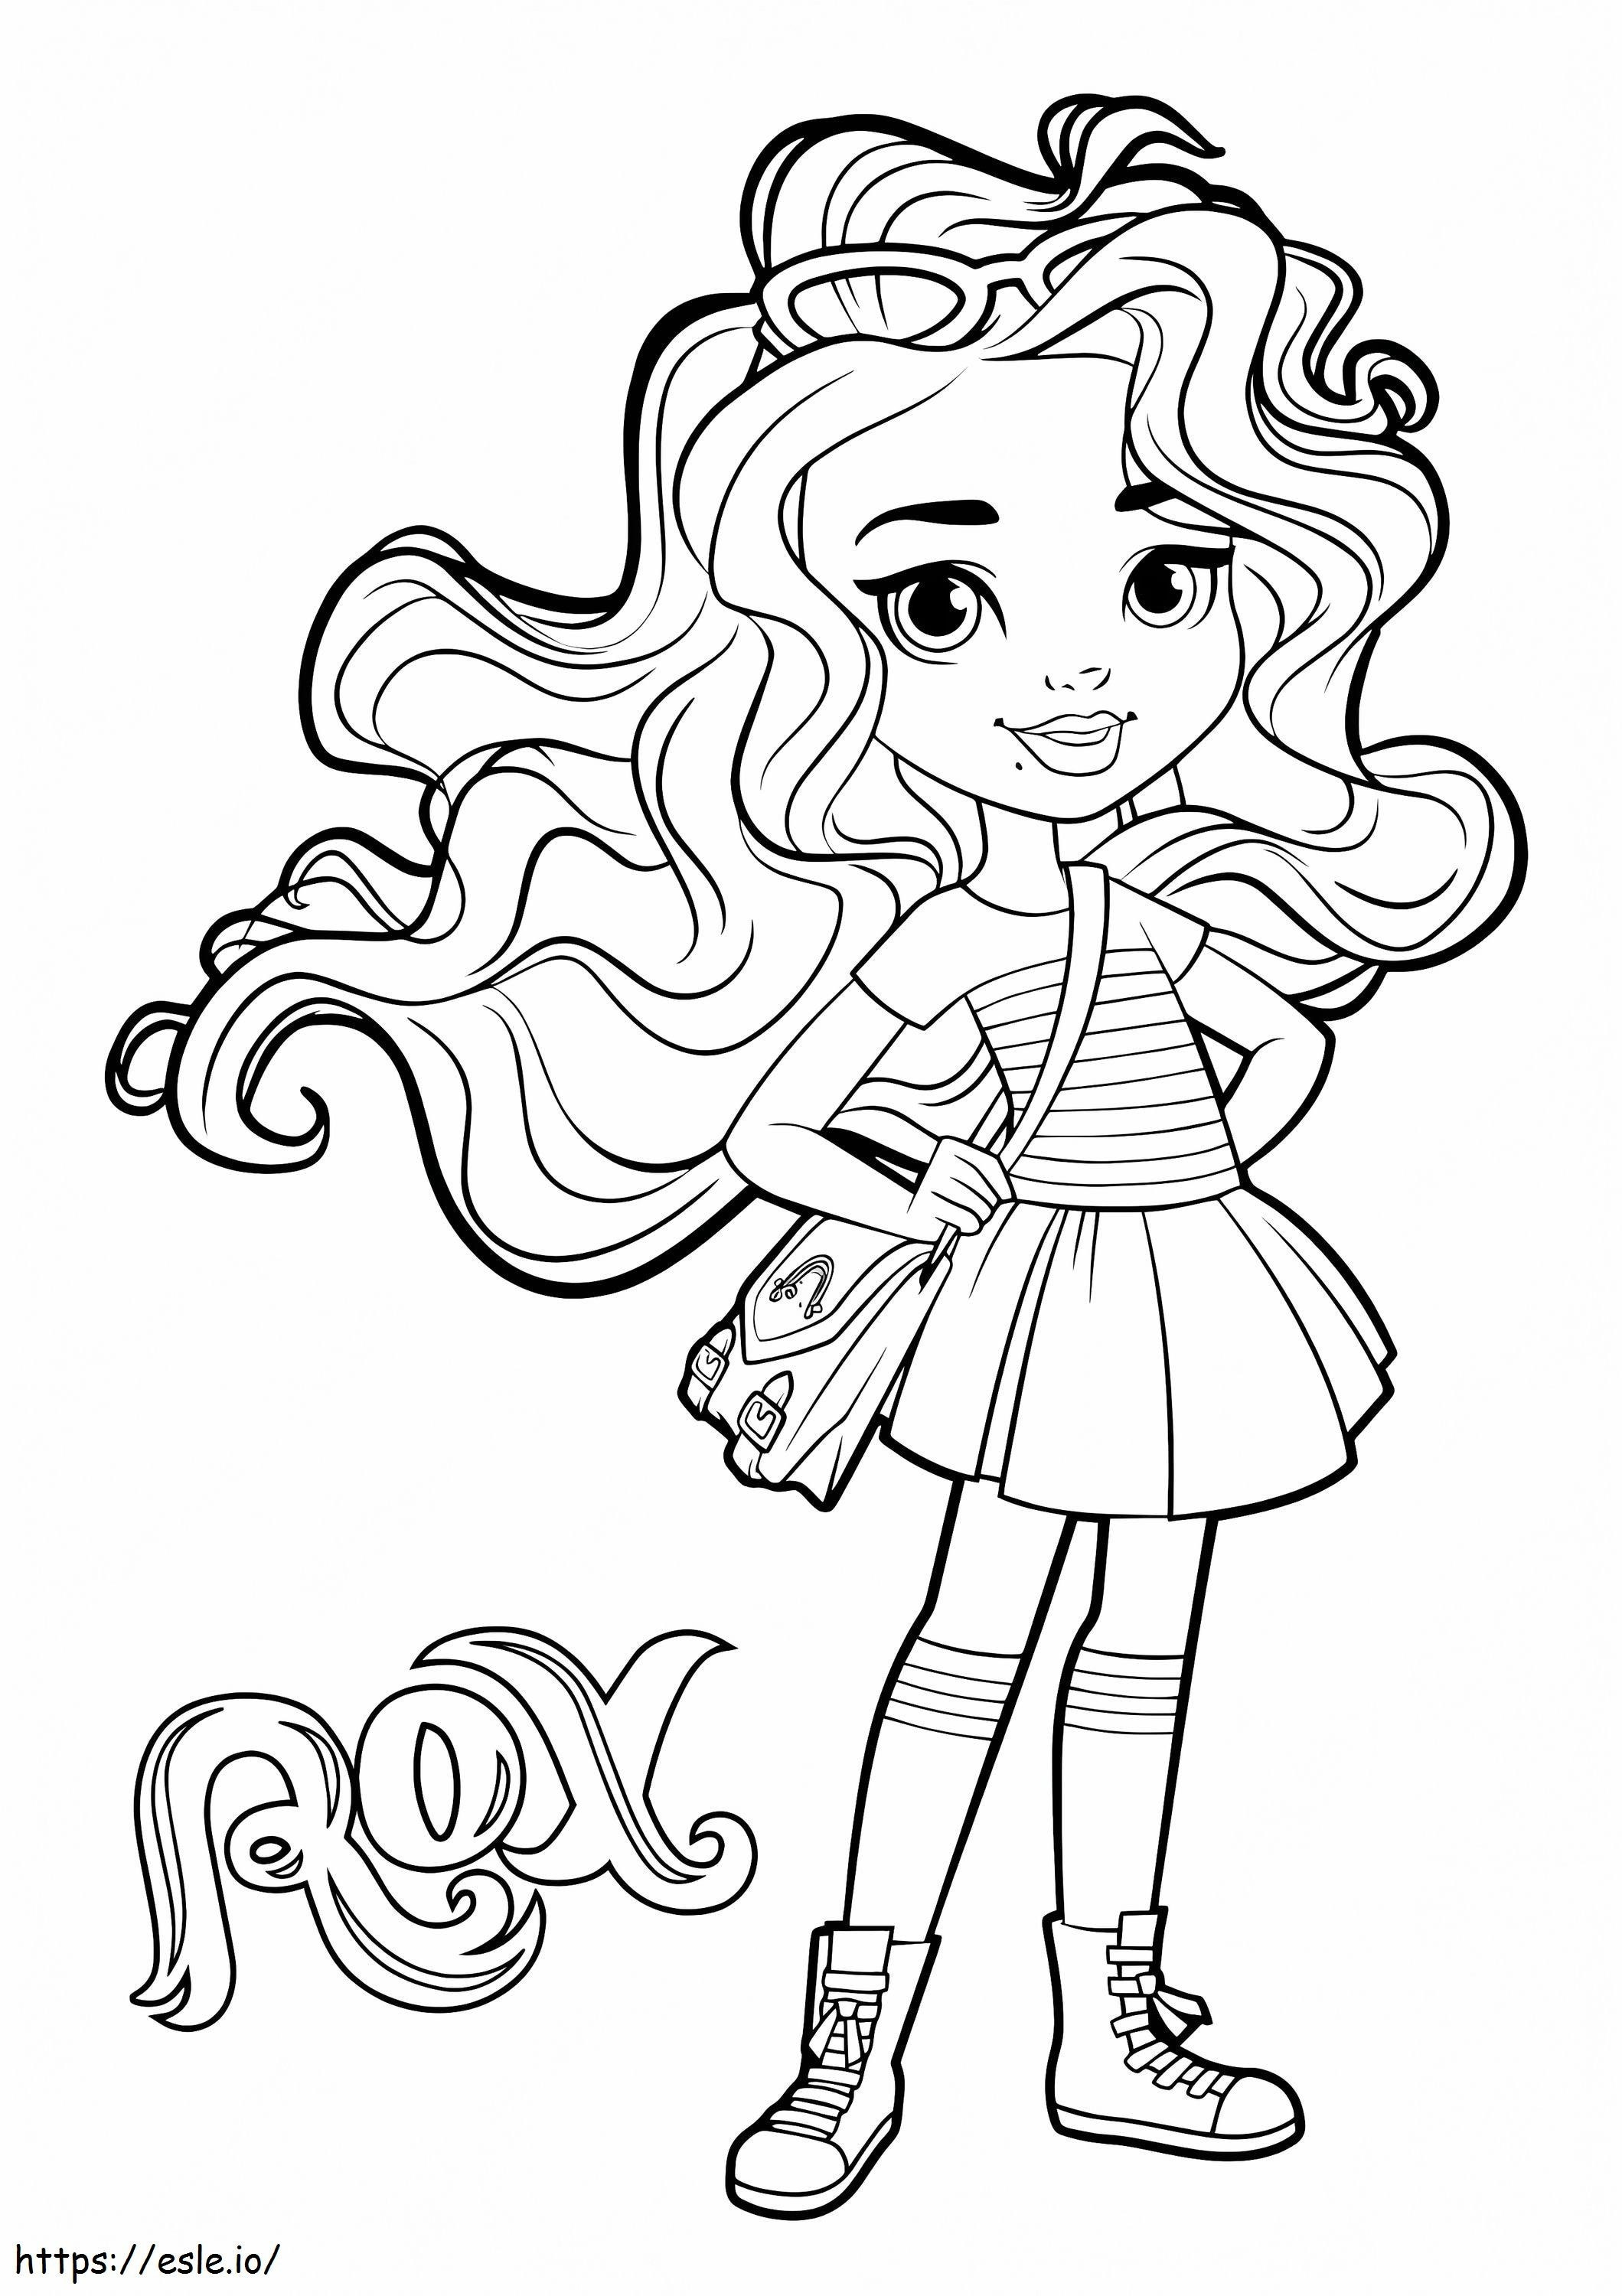 Rox From Sunny Day coloring page